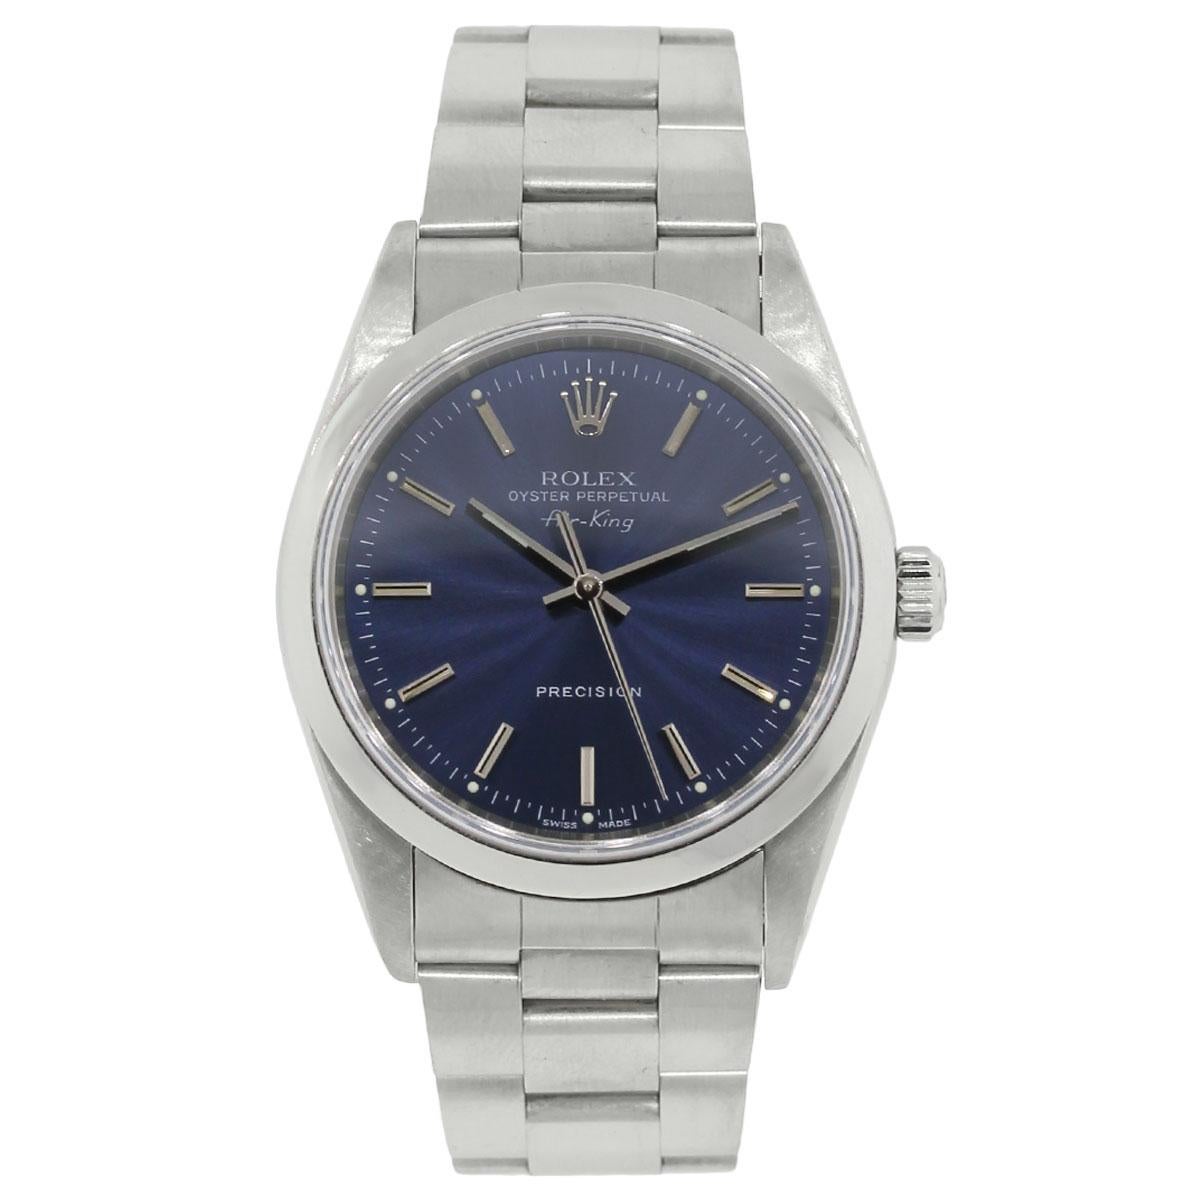 Brand: Rolex
MPN: 14000
Model: Air King
Case Material: Stainless steel
Case Diameter: 34mm
Crystal: Sapphire crystal
Bezel: Stainless steel smooth bezel
Dial: Blue dial
Bracelet: Stainless steel oyster band
Size: Will fit a 6.75″ wrist
Clasp: Fold